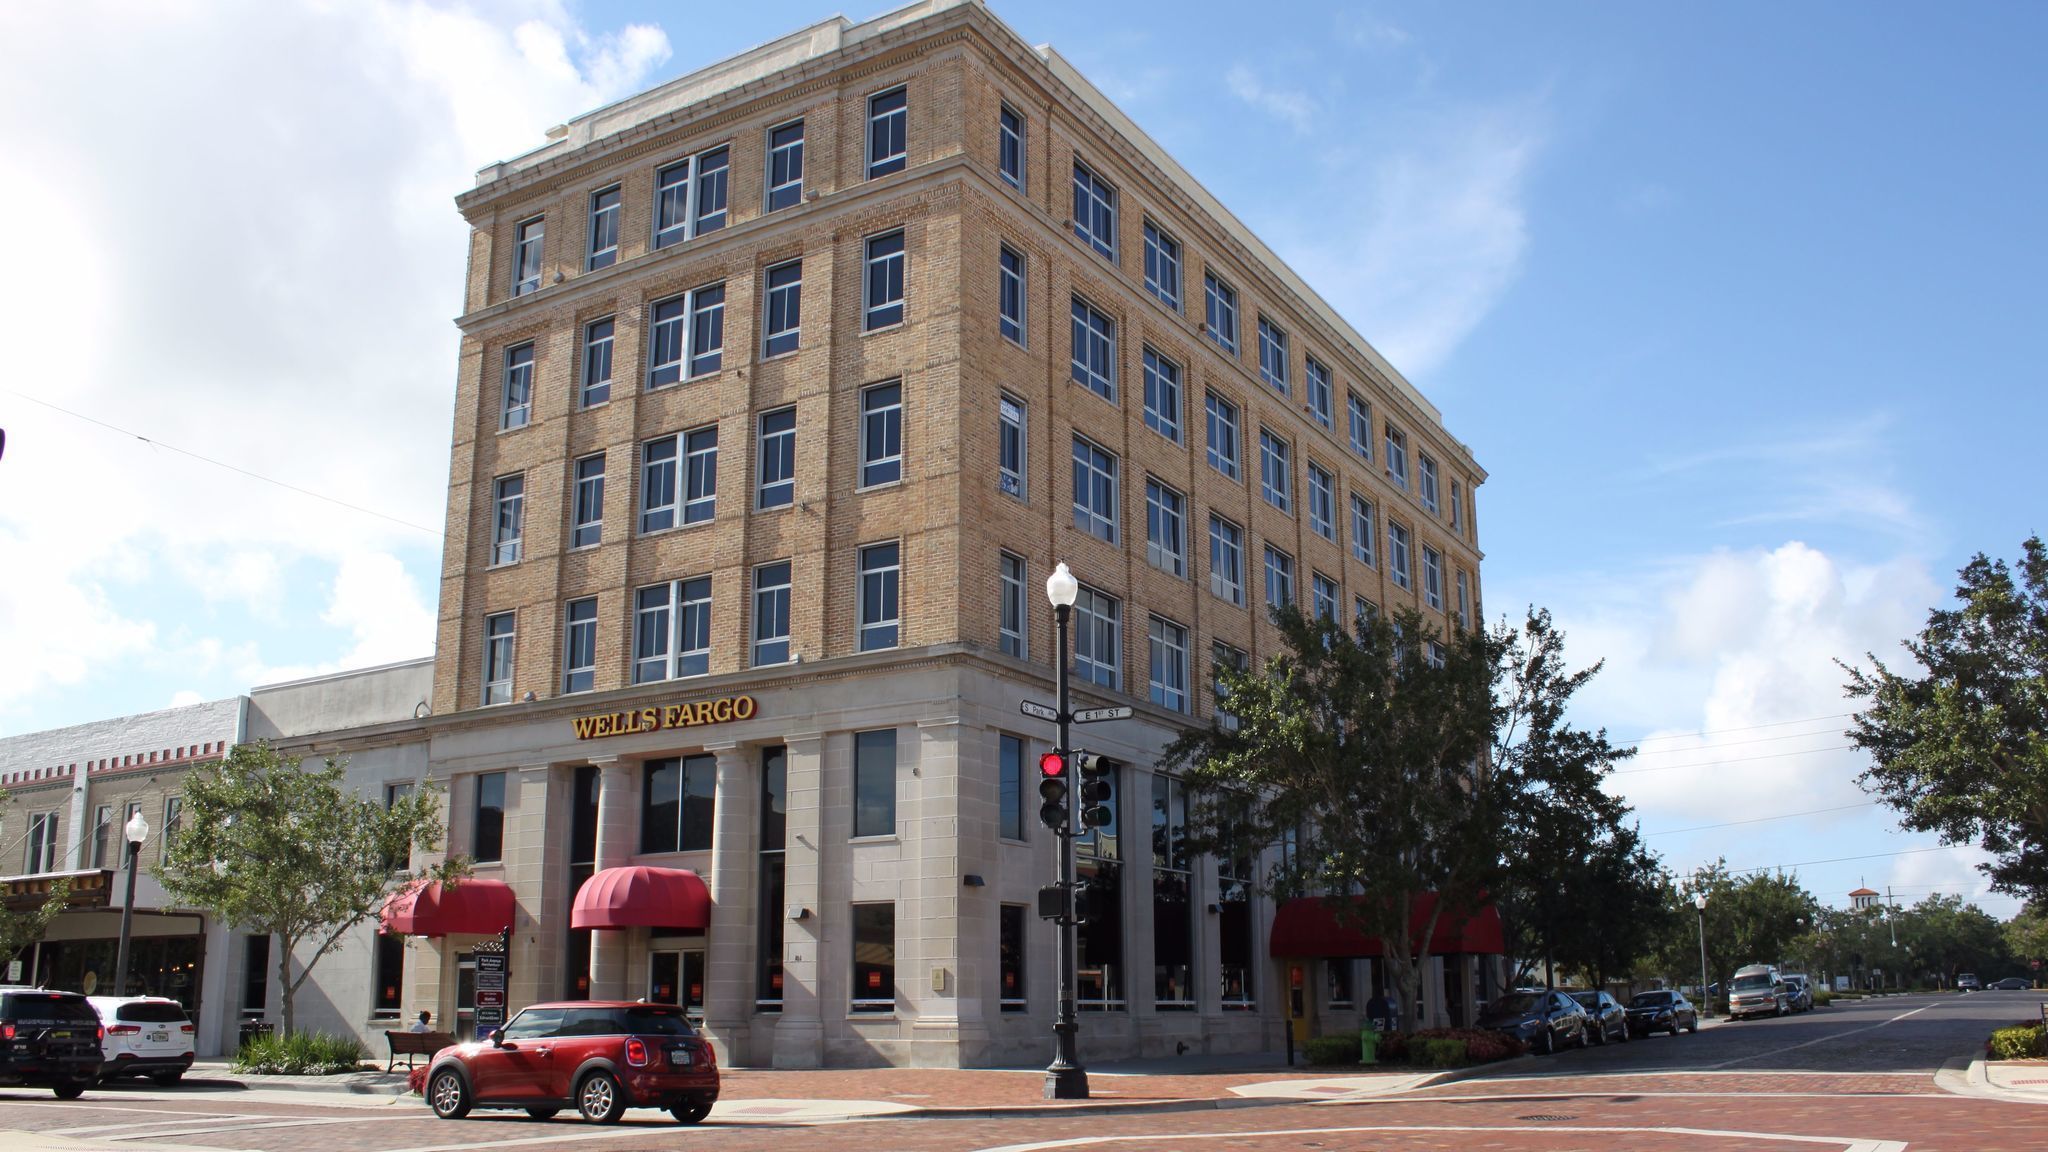 Second luxury hotel planned for historic Sanford building - Orlando